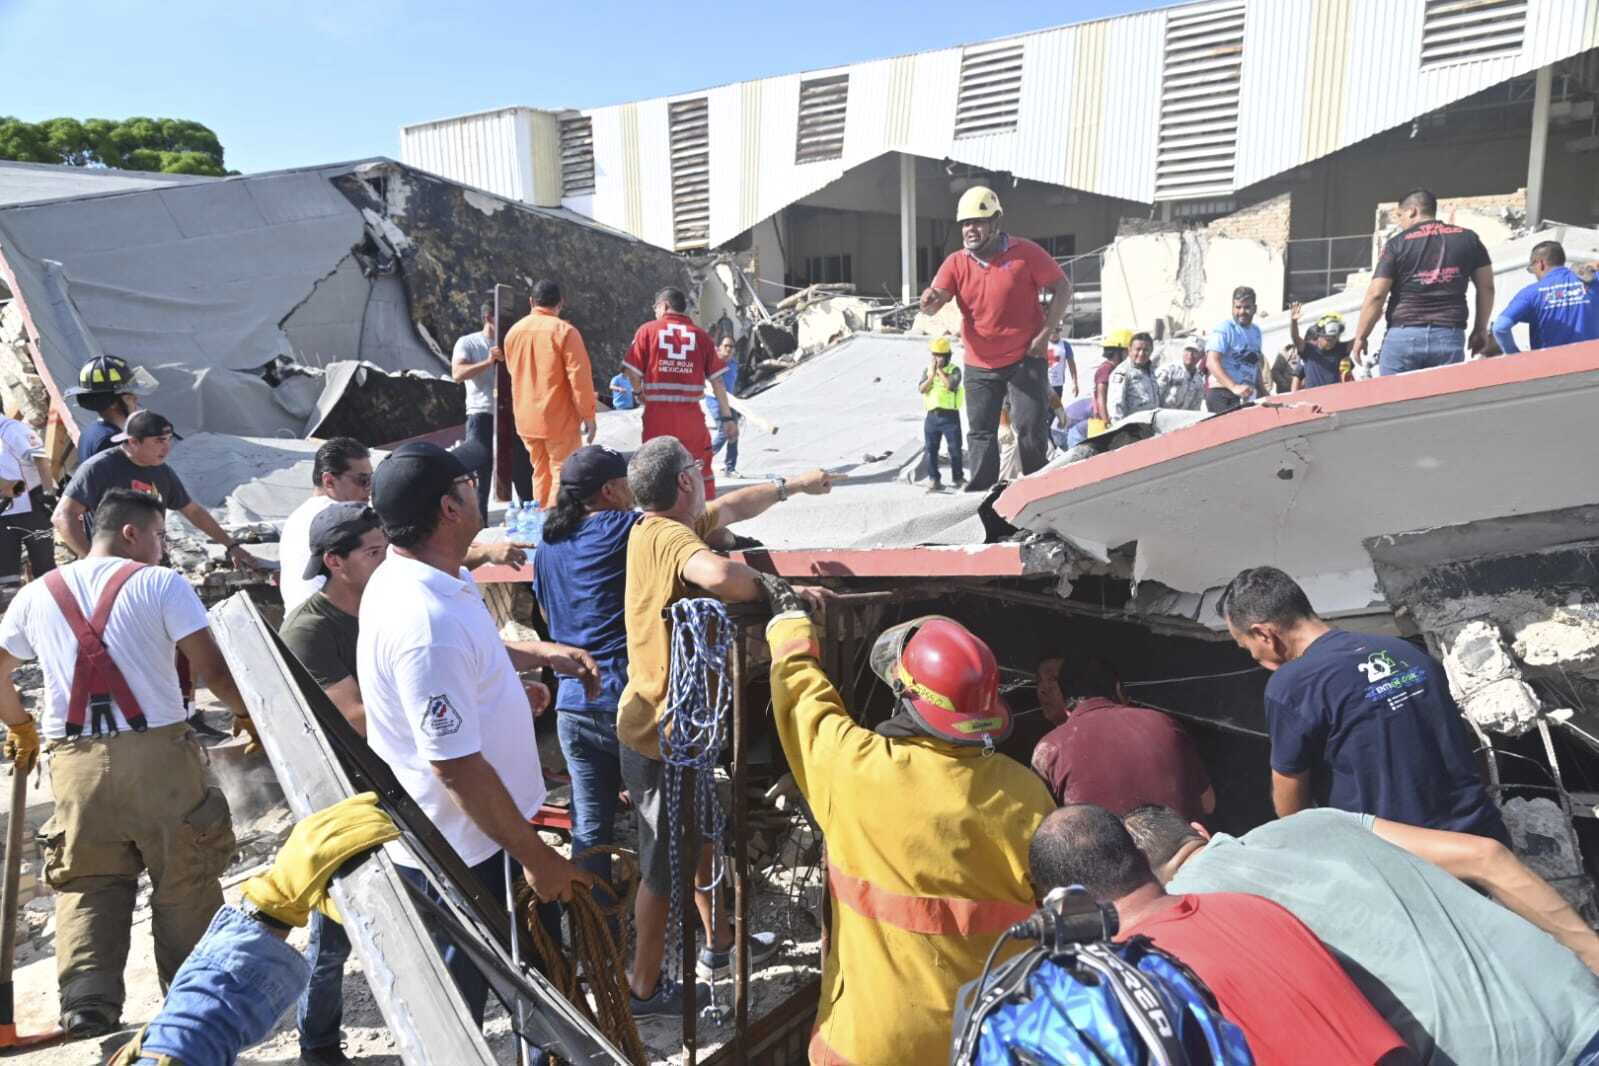 Rescue workers search for survivors amid debris after the roof of a church collapsed